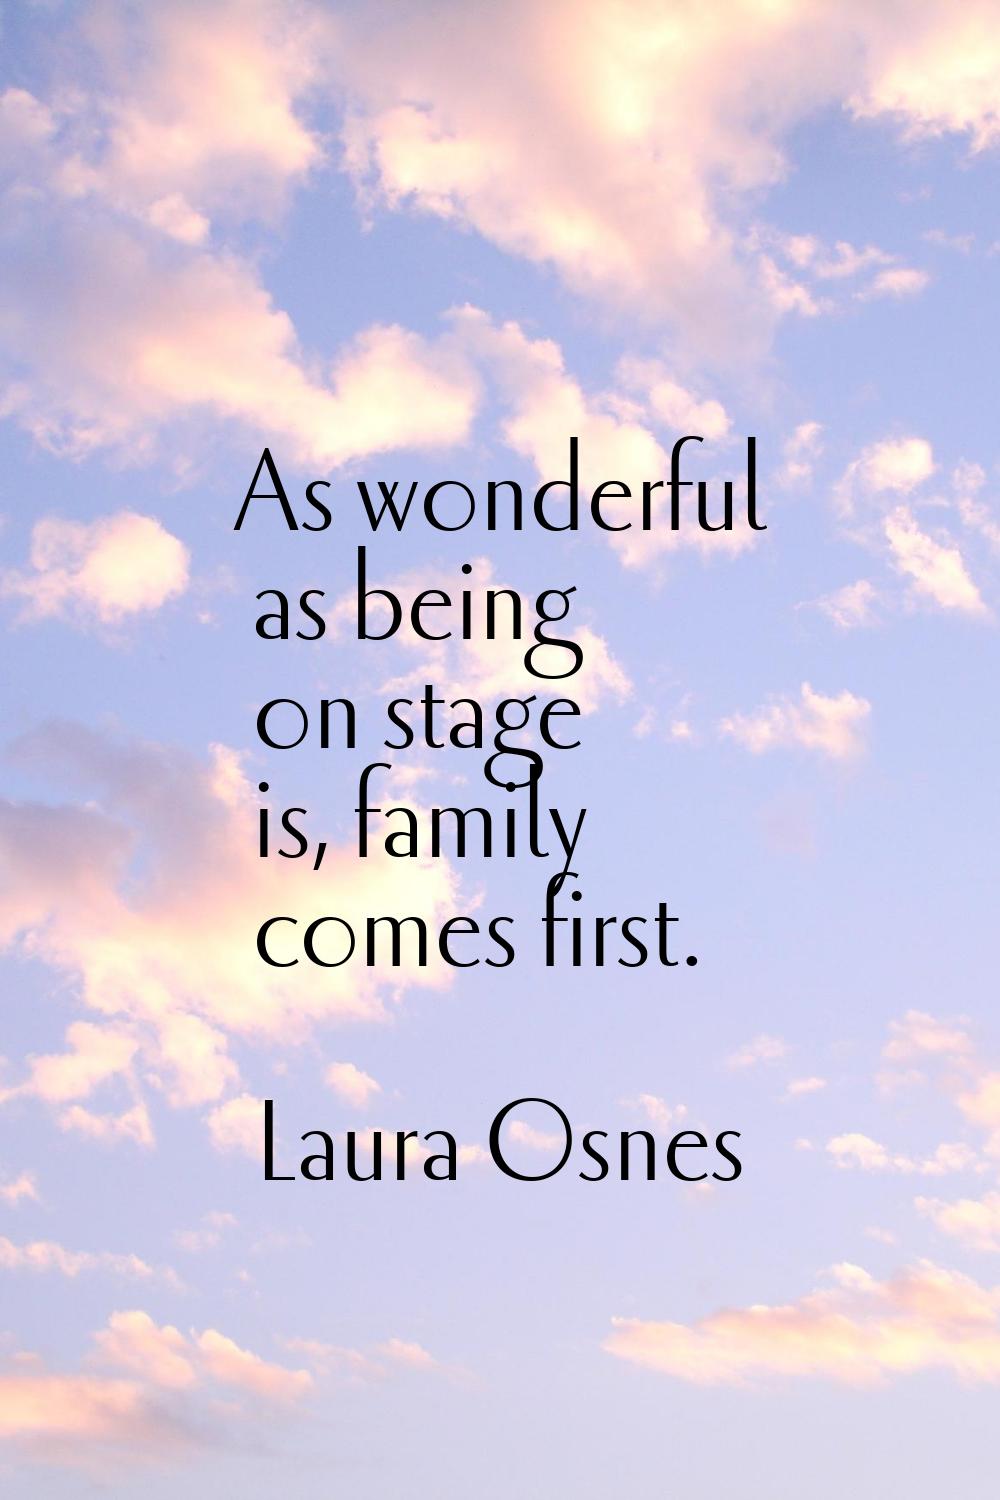 As wonderful as being on stage is, family comes first.